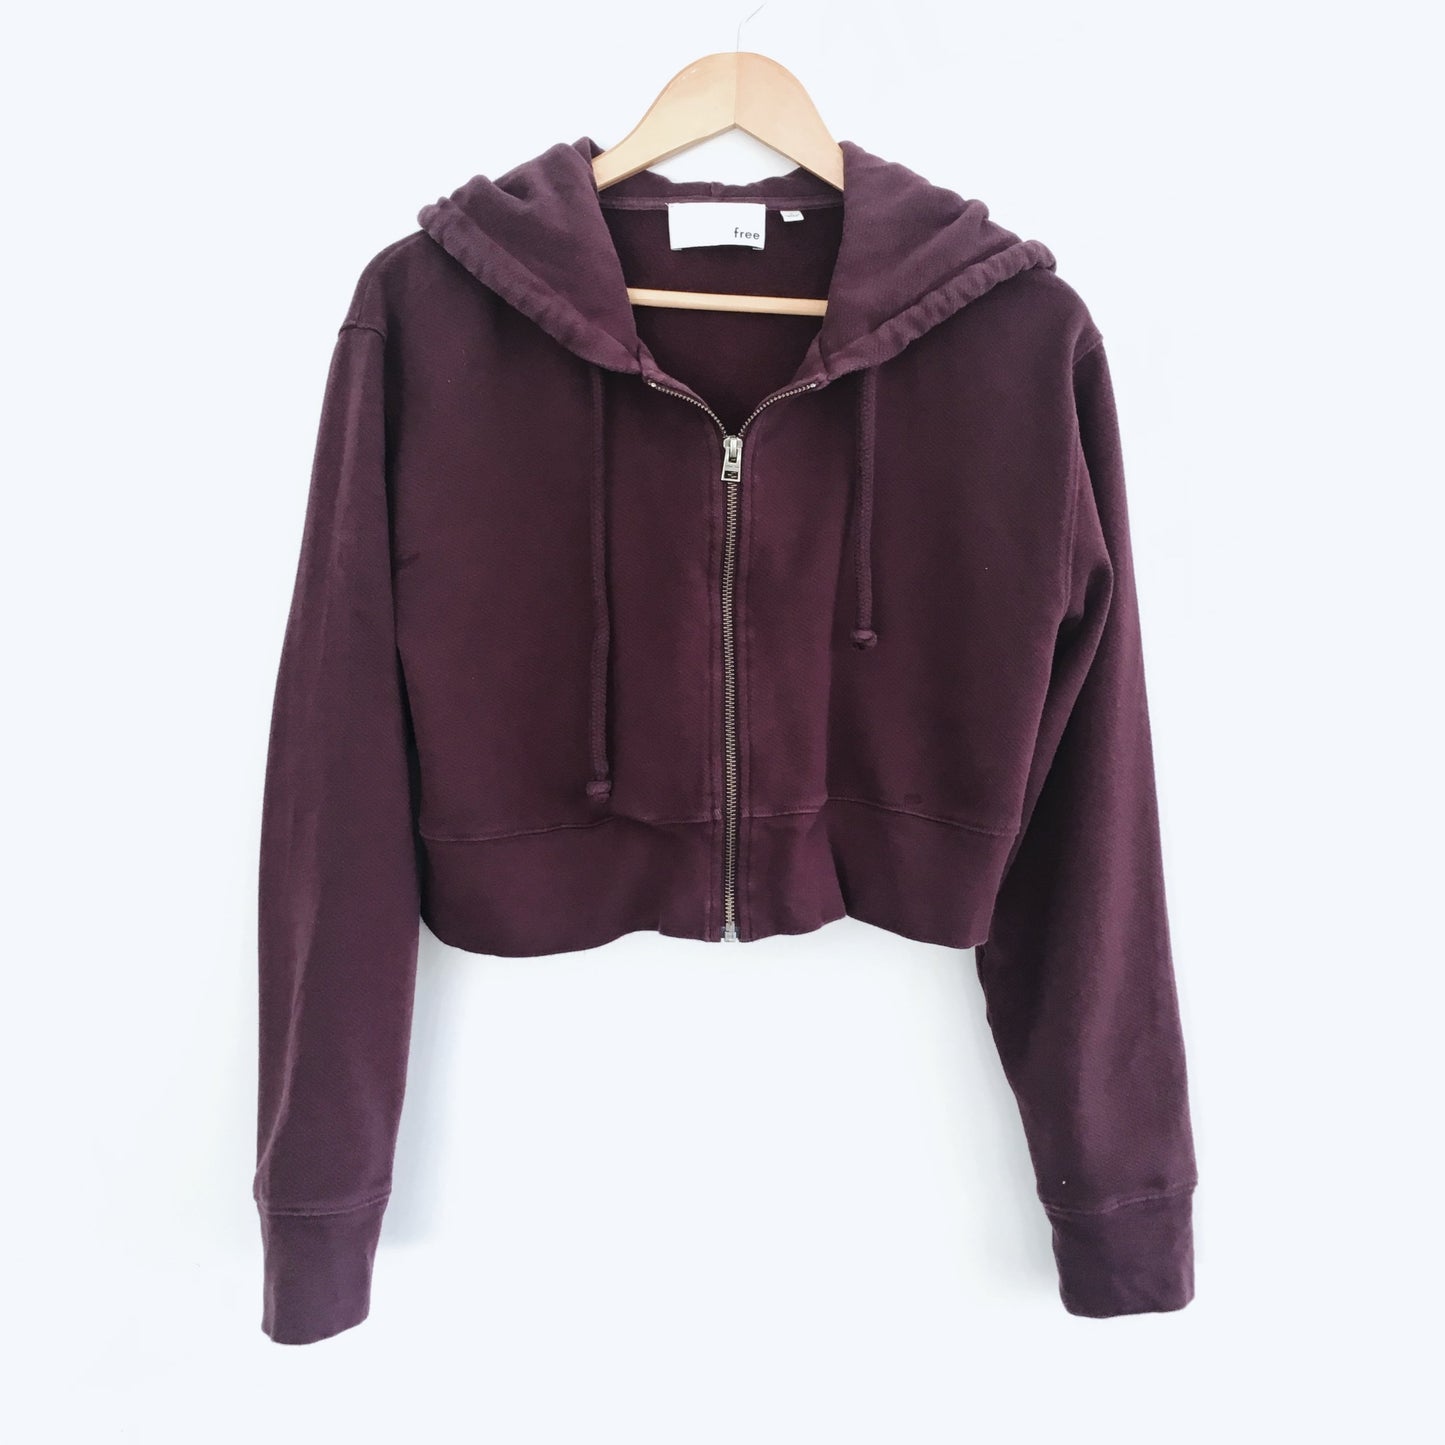 Wilfred Free Aritzia Cropped Hoodie - size small